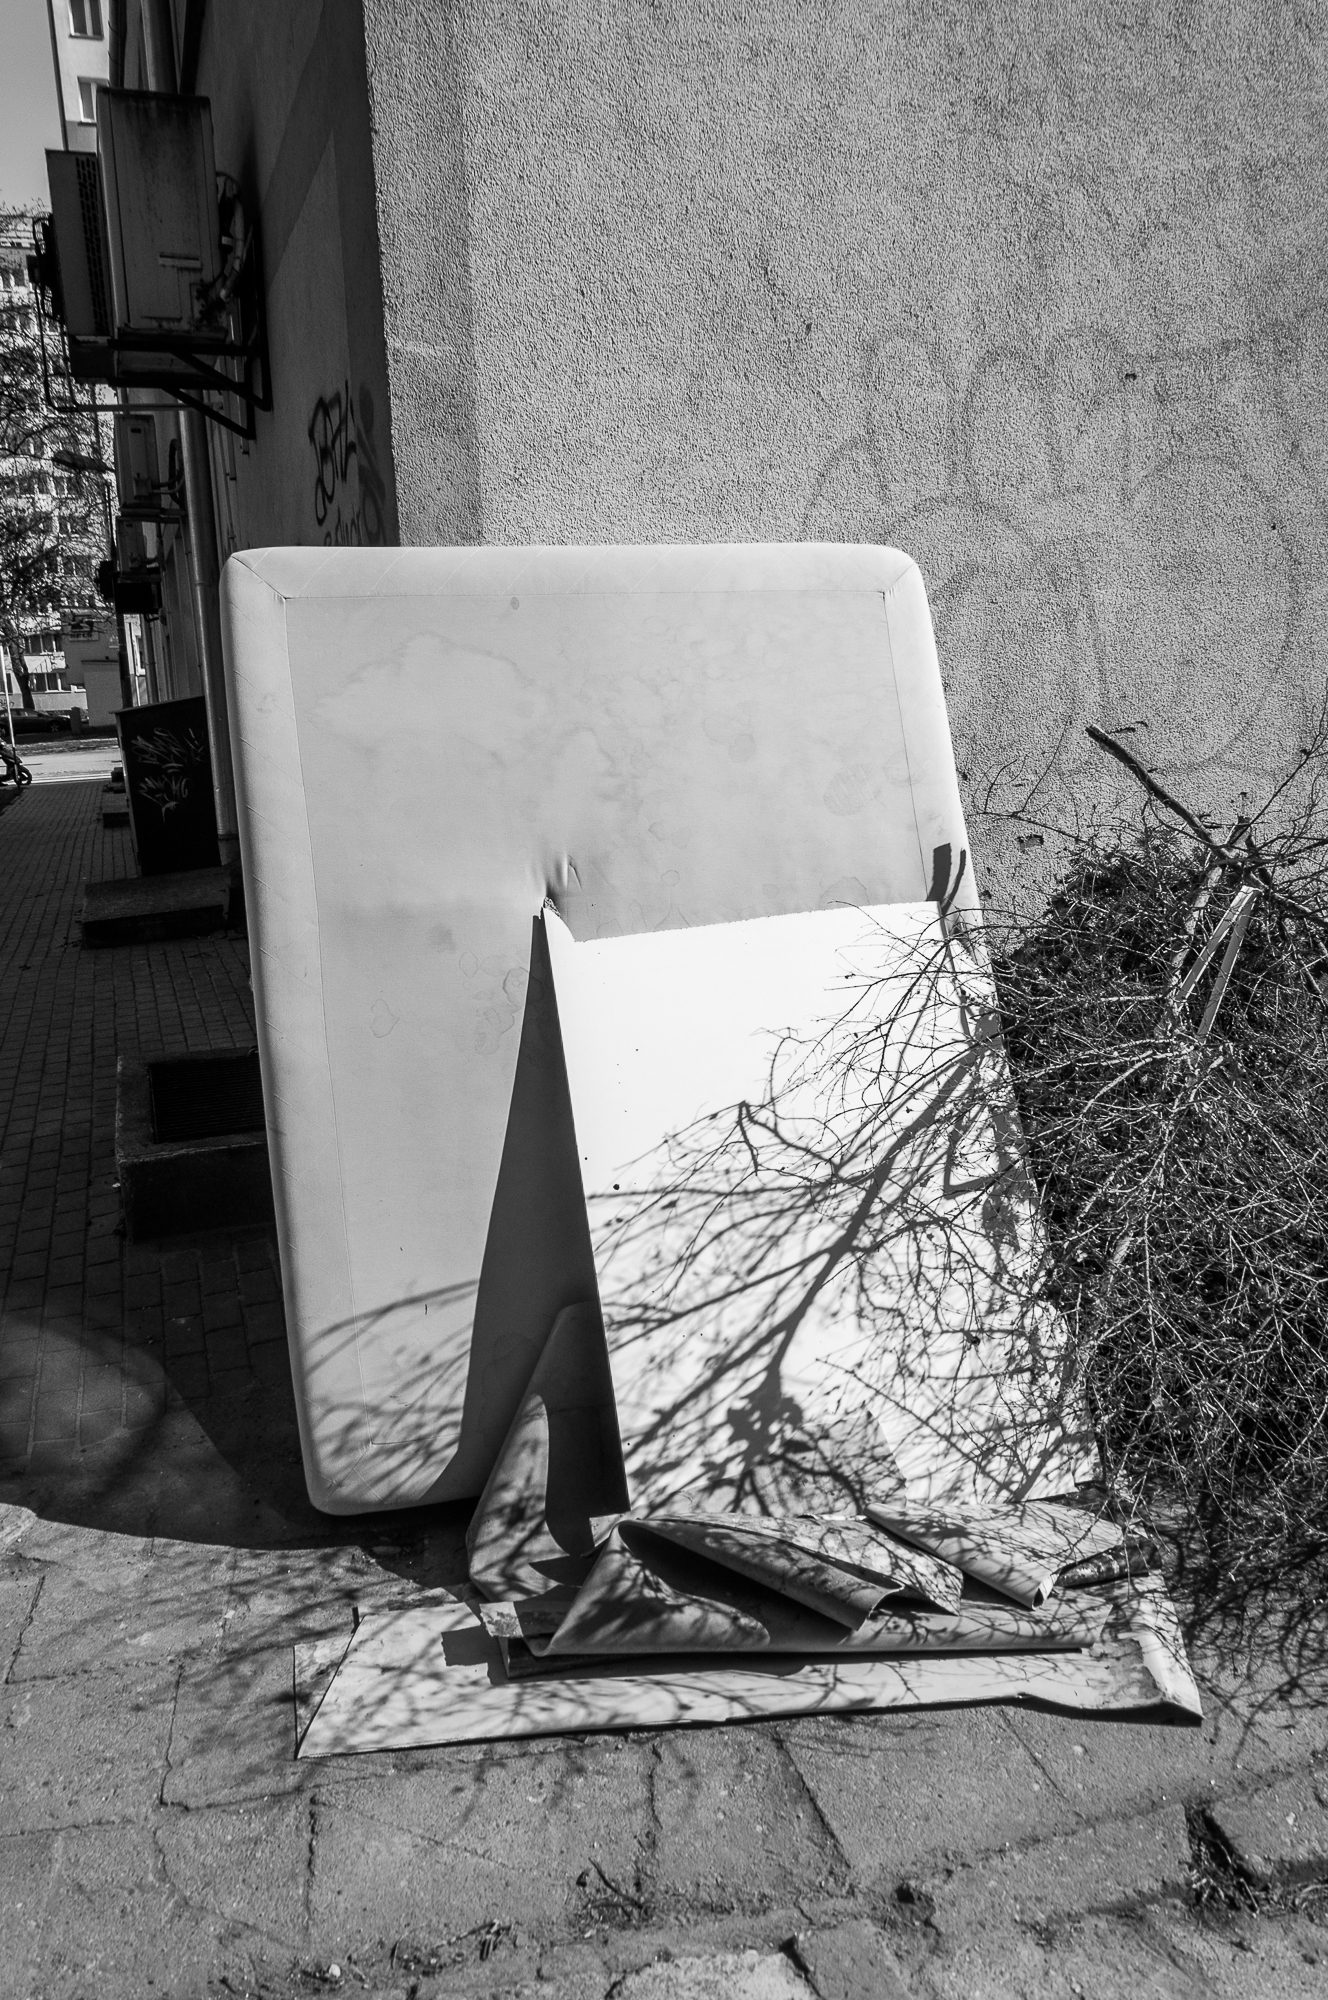 Adam Mazek Photography 2020. Warsaw Street Photography. Post: "A physical attack is much worse than a verbal one." Minimalism.